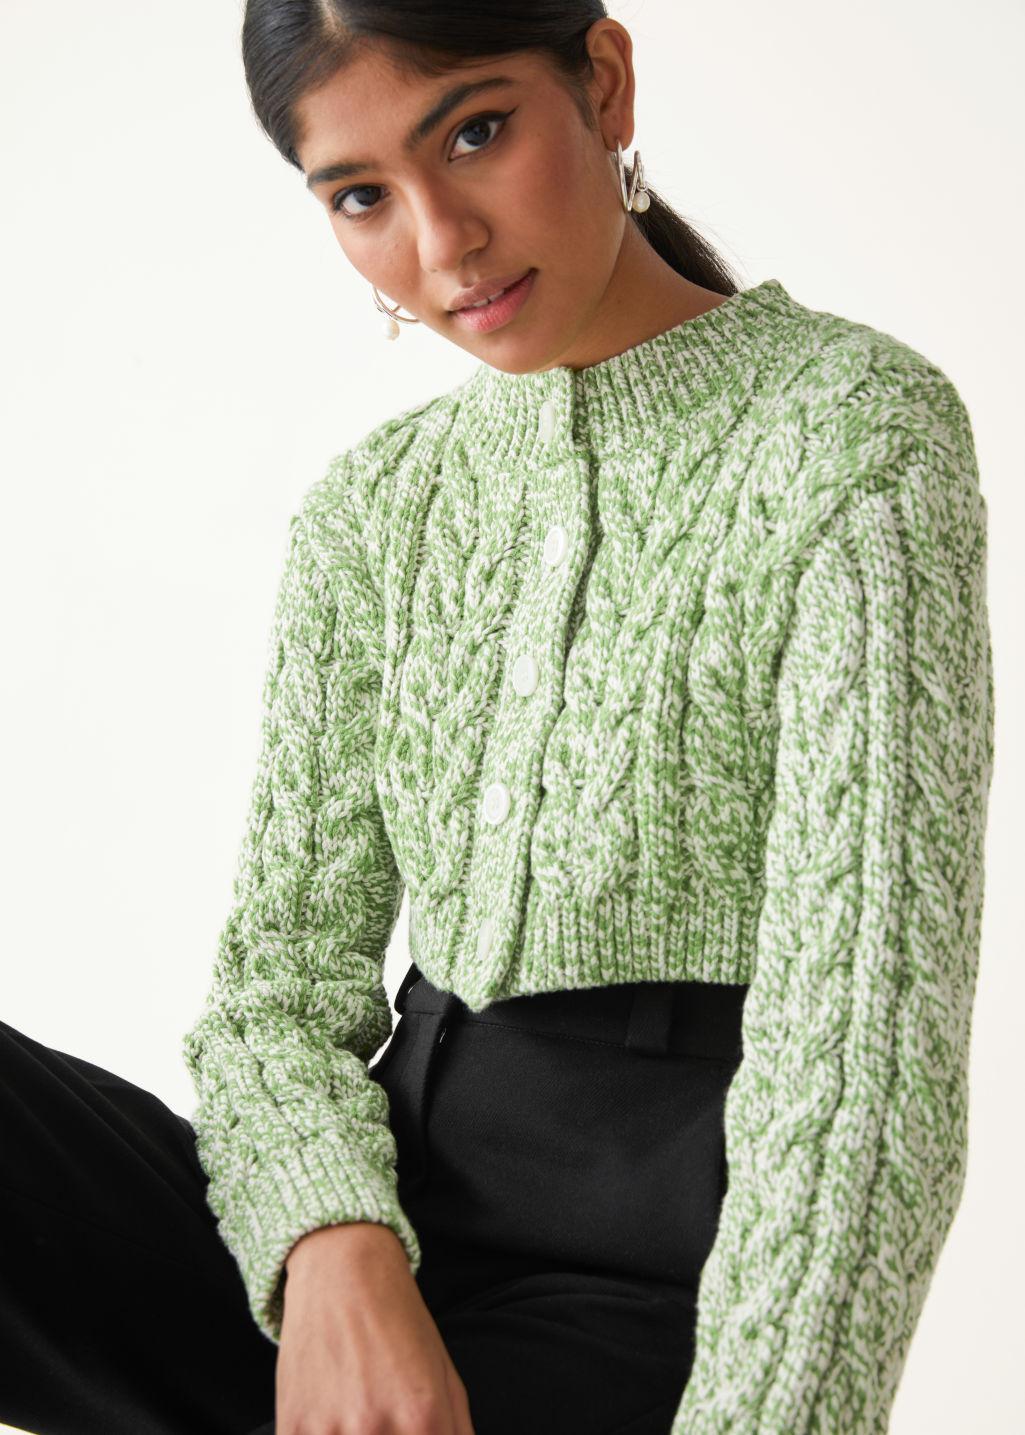 & Other Stories Cropped Cable Knit Cardigan in Green | Lyst